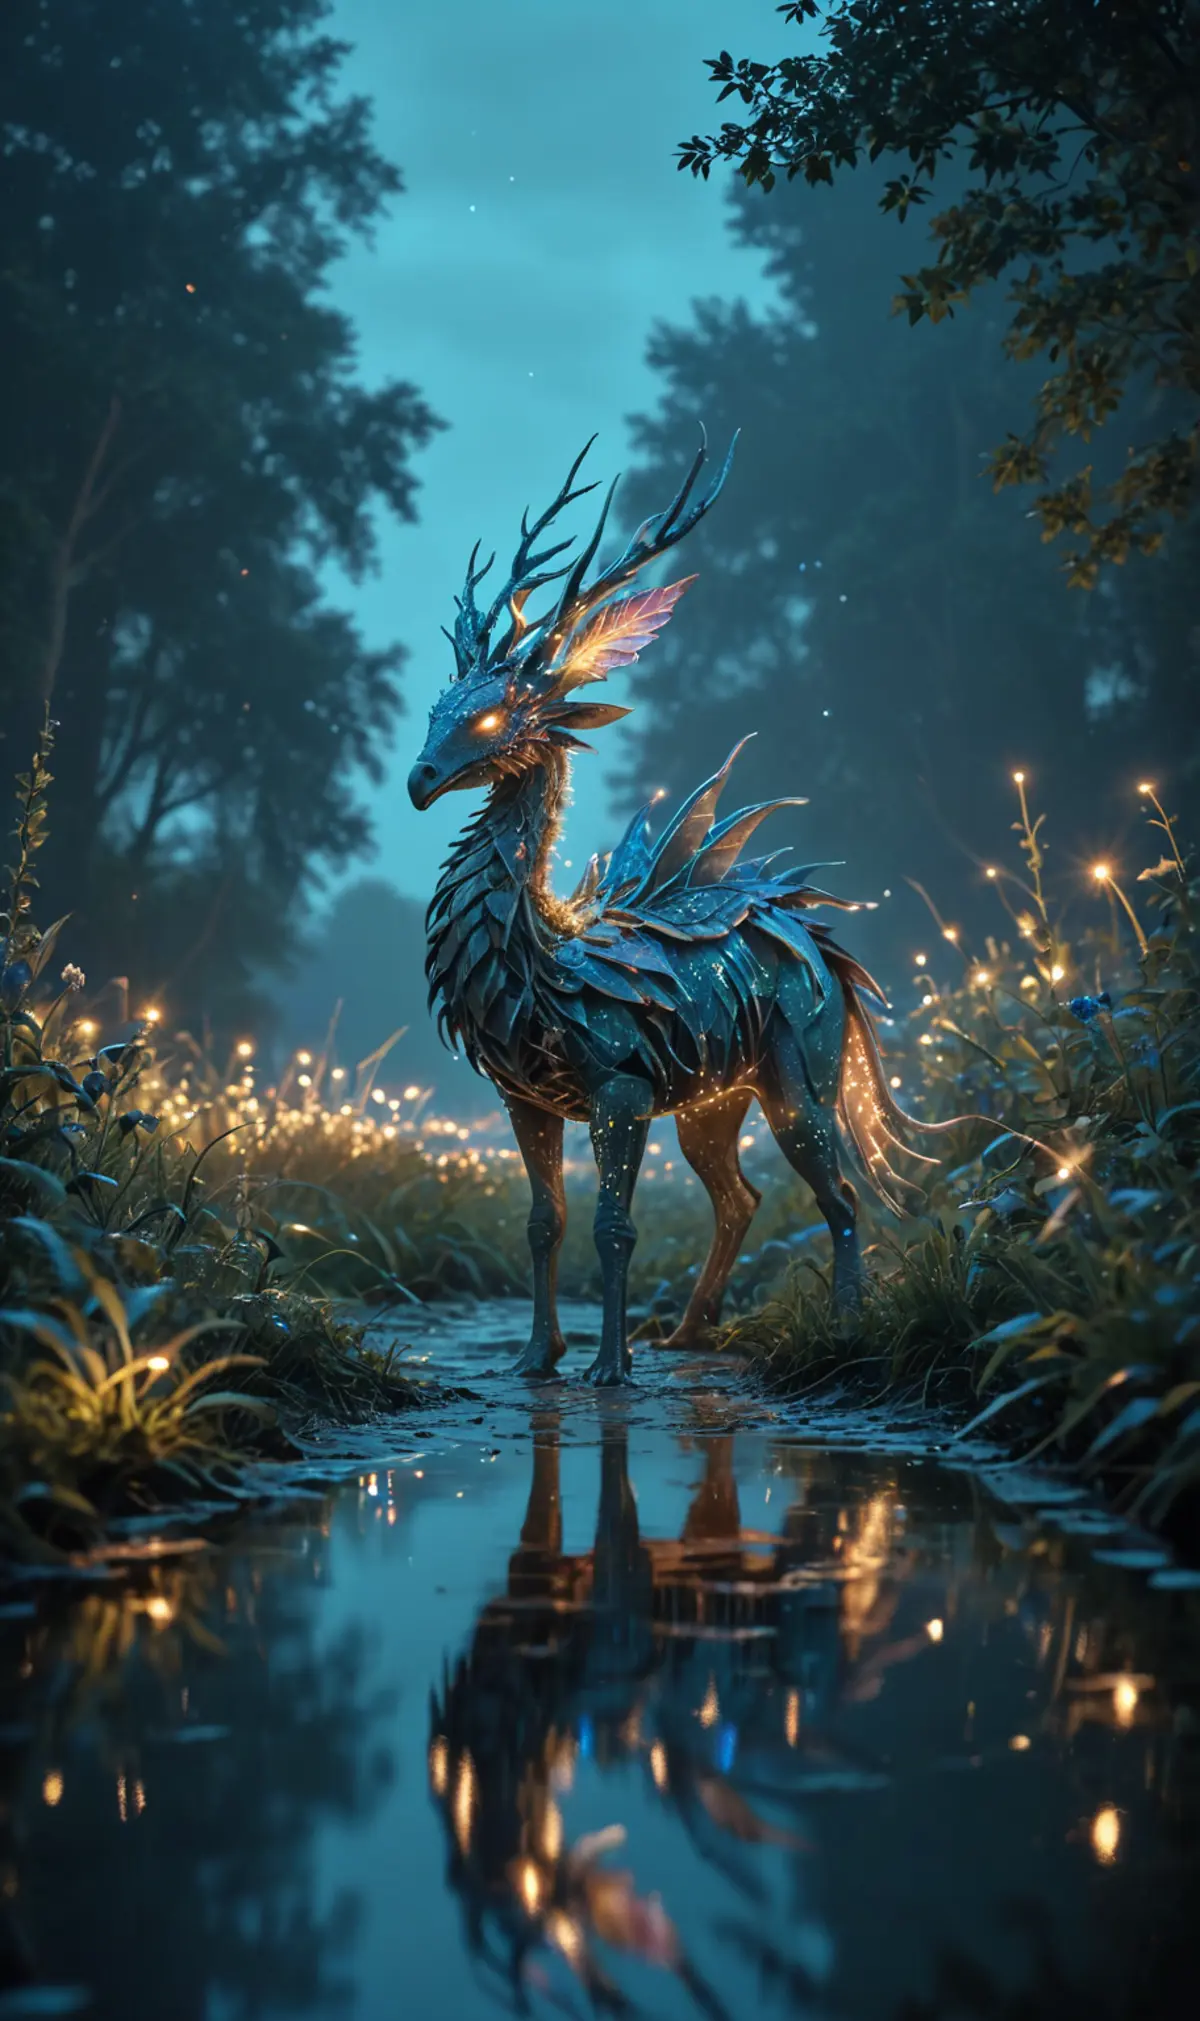 A fantastic stag standing in a moonlit forest. Its body reflects the glow of the bioluminescent plants around it, and a puddle mirrors its striking form below.